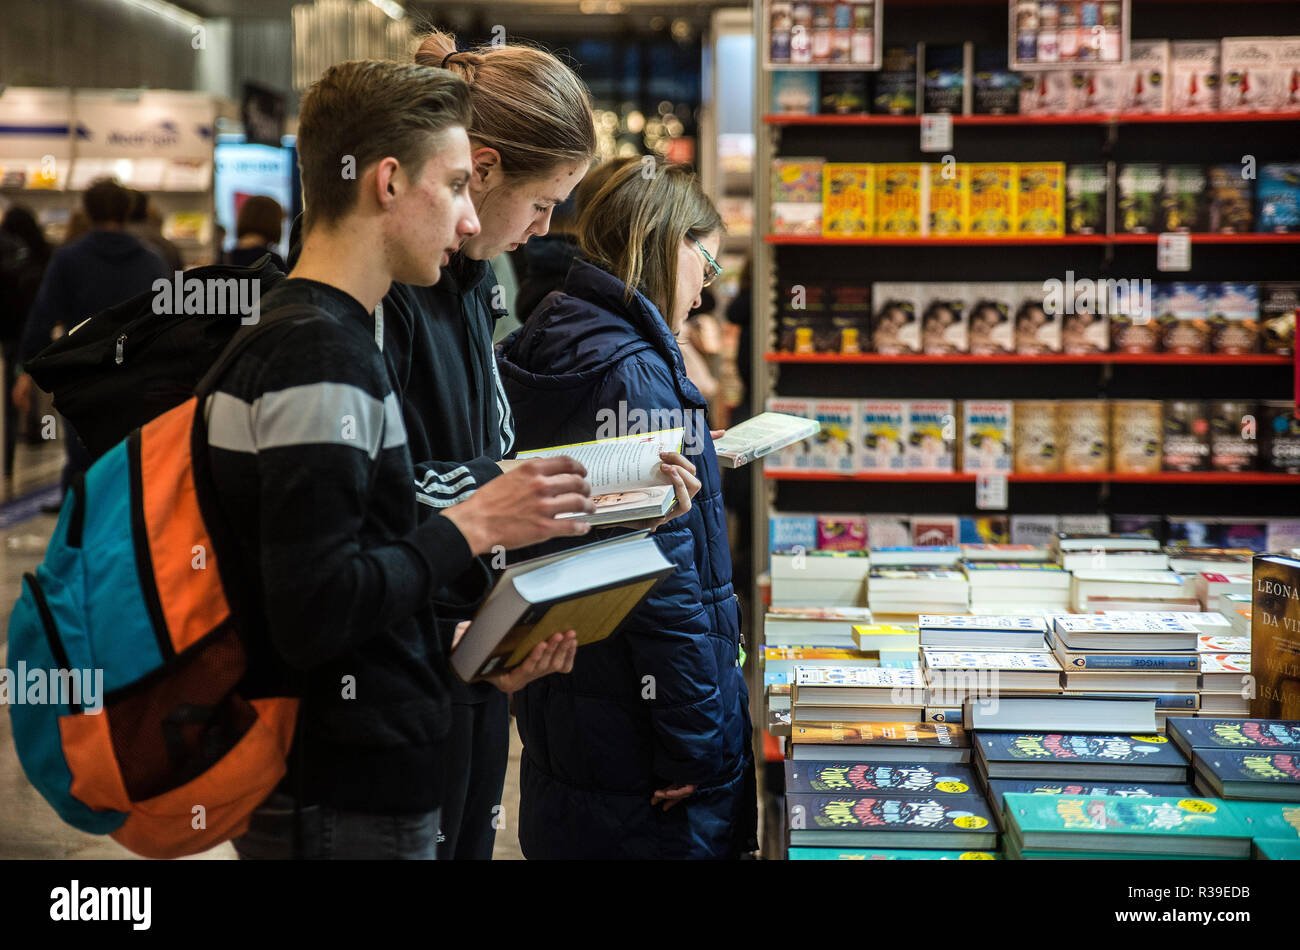 Ljubljana, Slovenia. 21th November 2018. Visitors looking and reading books at 34th Slovenian book fair which brings more than 300 events, featuring more than a hundred publishers and 25,000 books, including 3,000 new titles. The fair is annually visited by around 35,000 book lovers. Credit: Matic Štojs Lomovšek/Alamy Live News Stock Photo